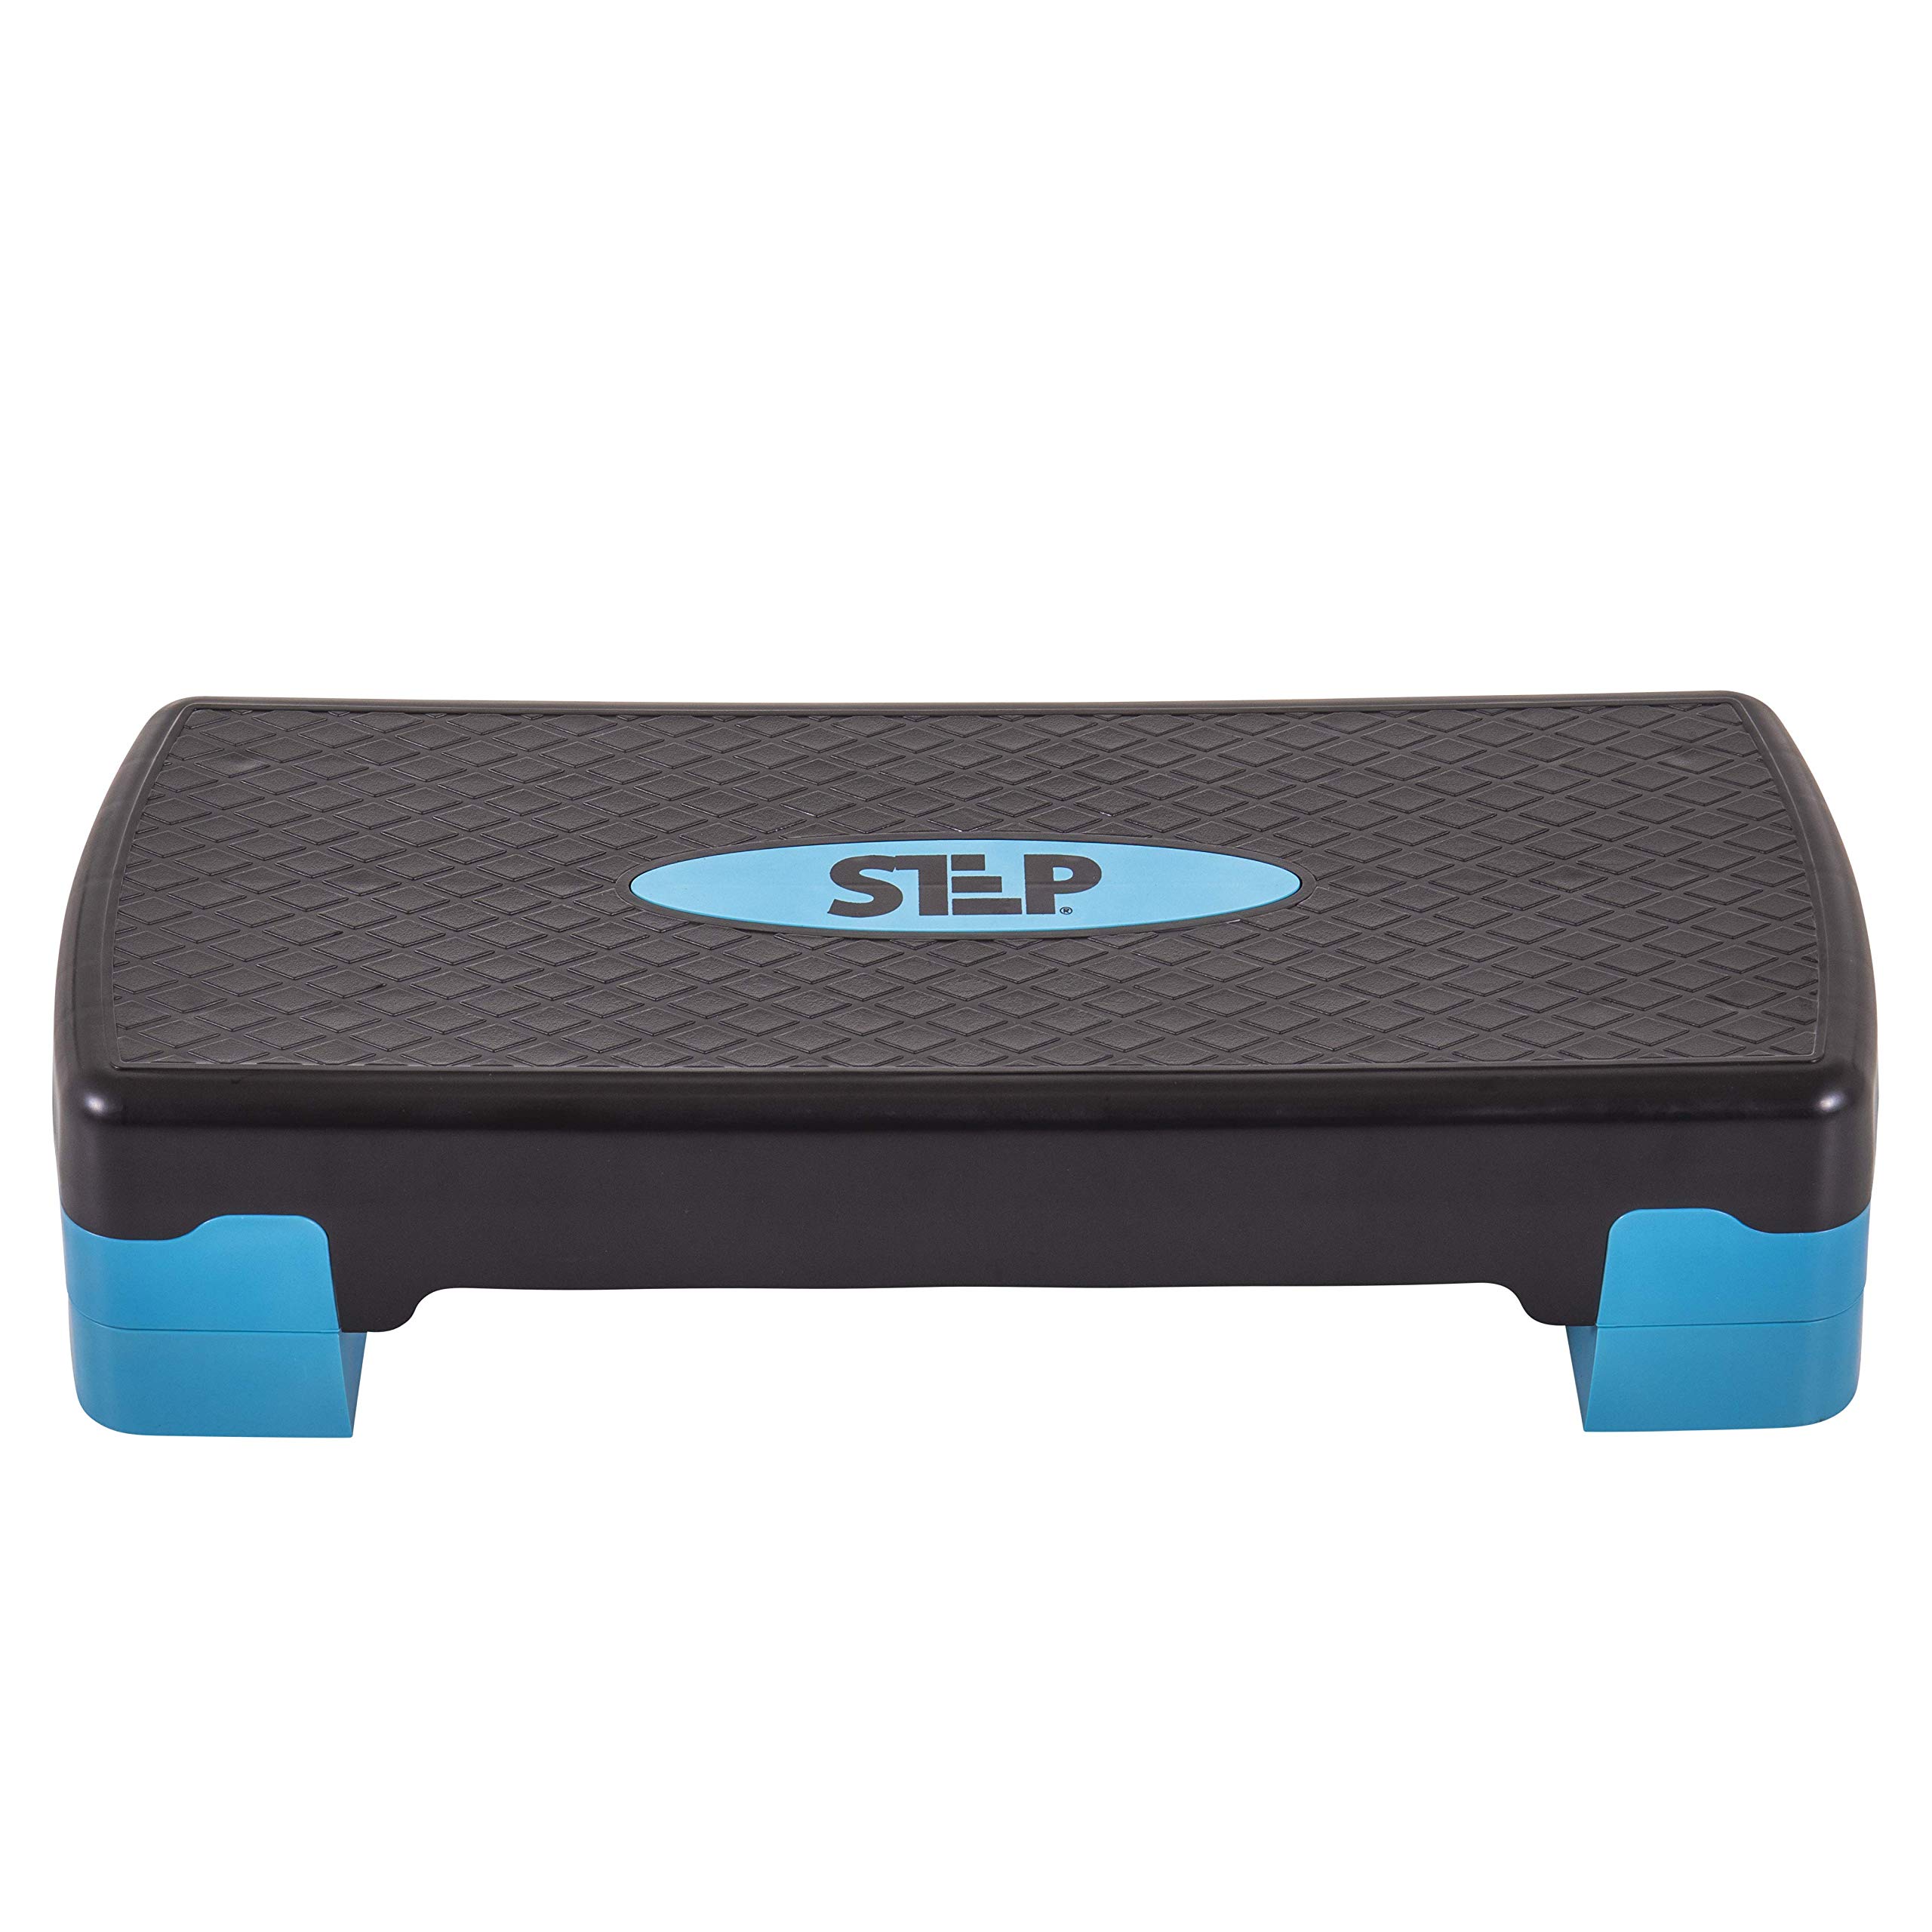 The Step Aerobic Platform for Home Workout, Aerobic Step Exercise Equipment for Exercise, Lightweight Adjustable Height Workout Equipment